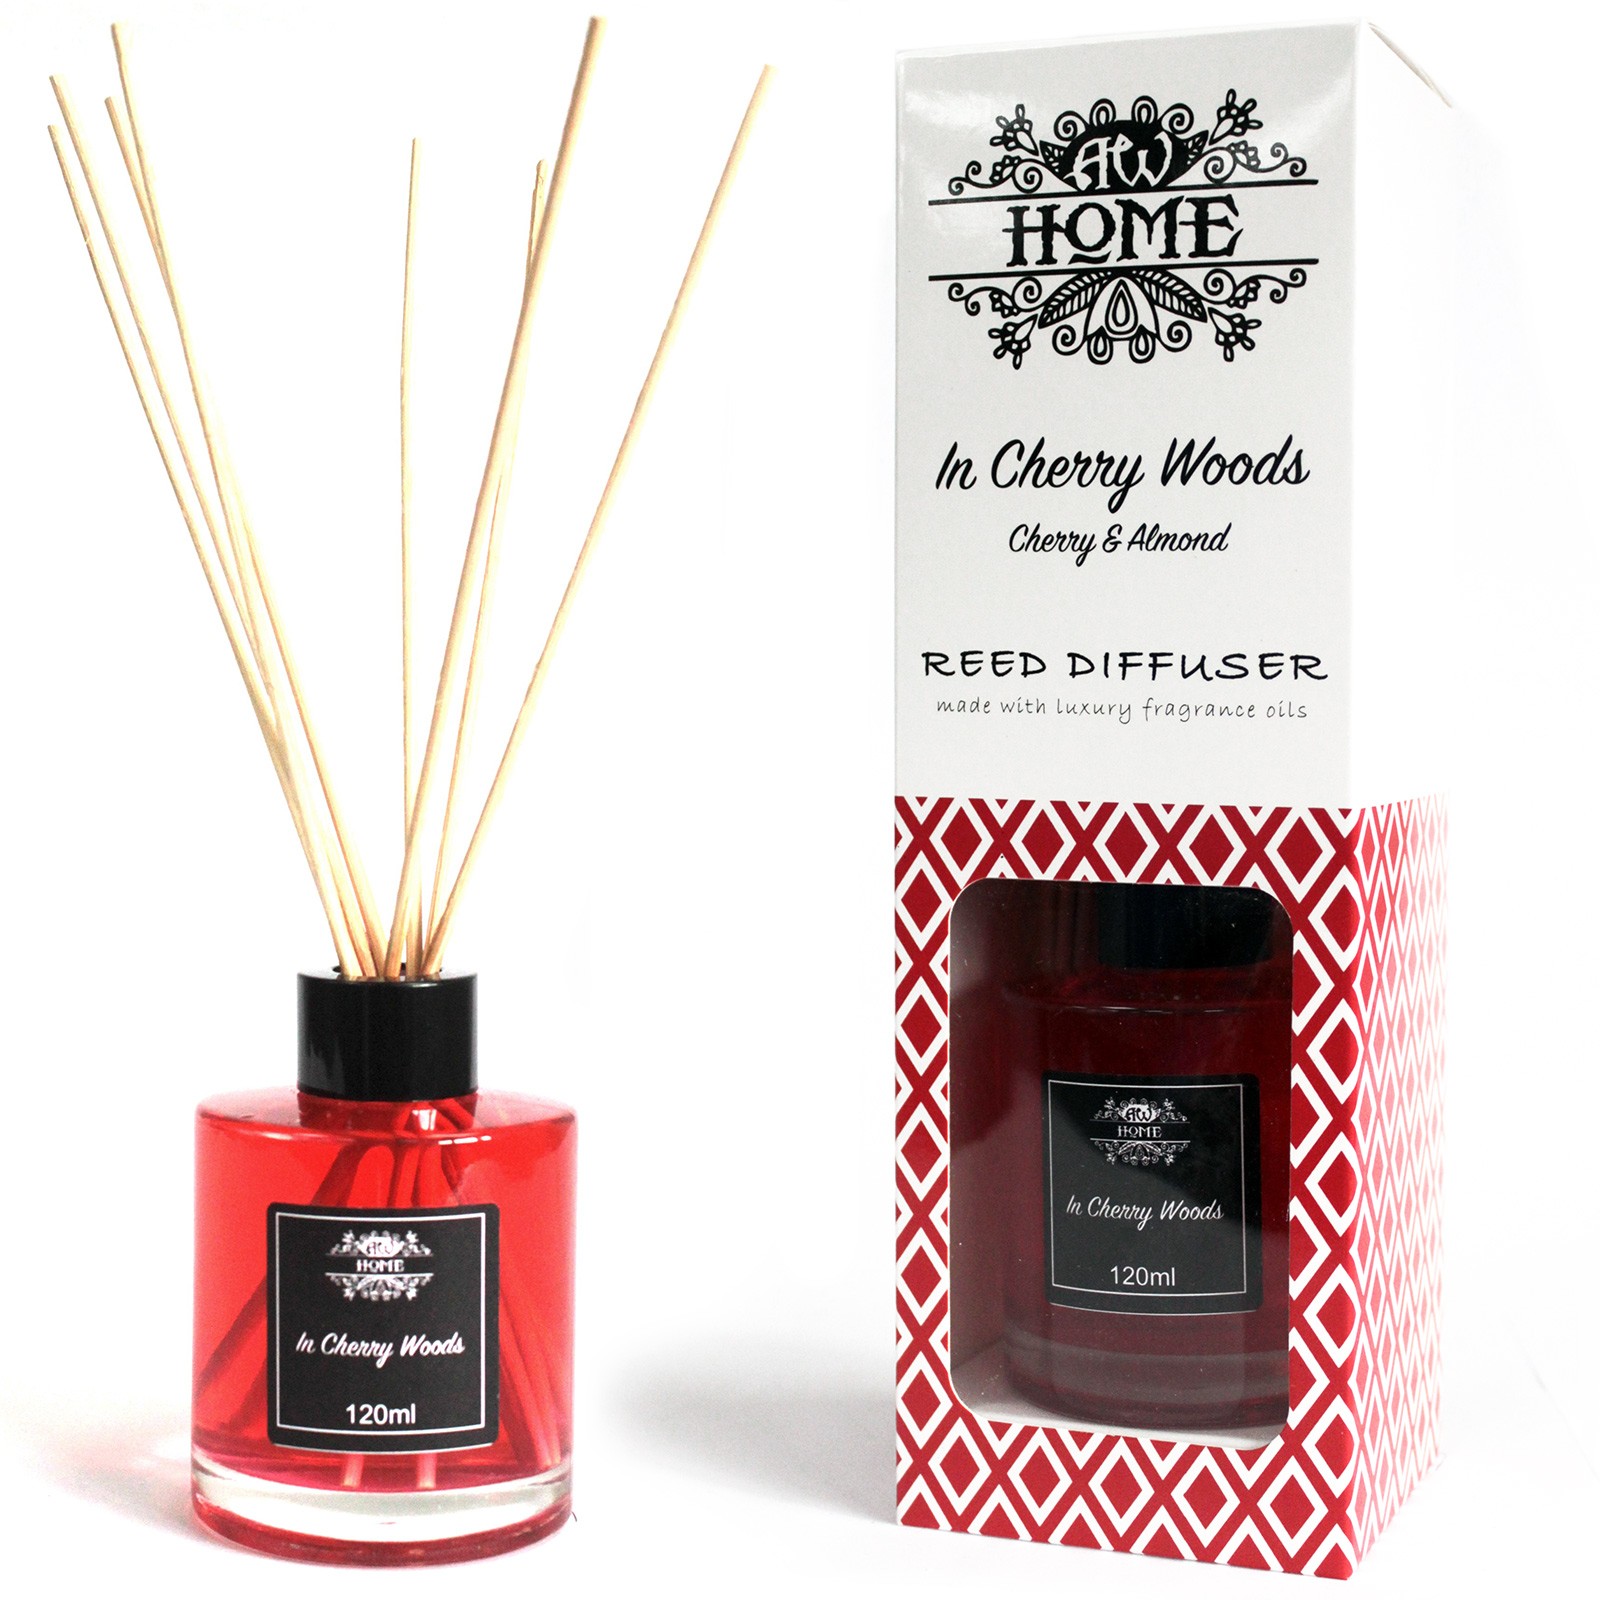 In Cherry Woods - Home Fragrance Reed Diffuser - 120ml With Reeds